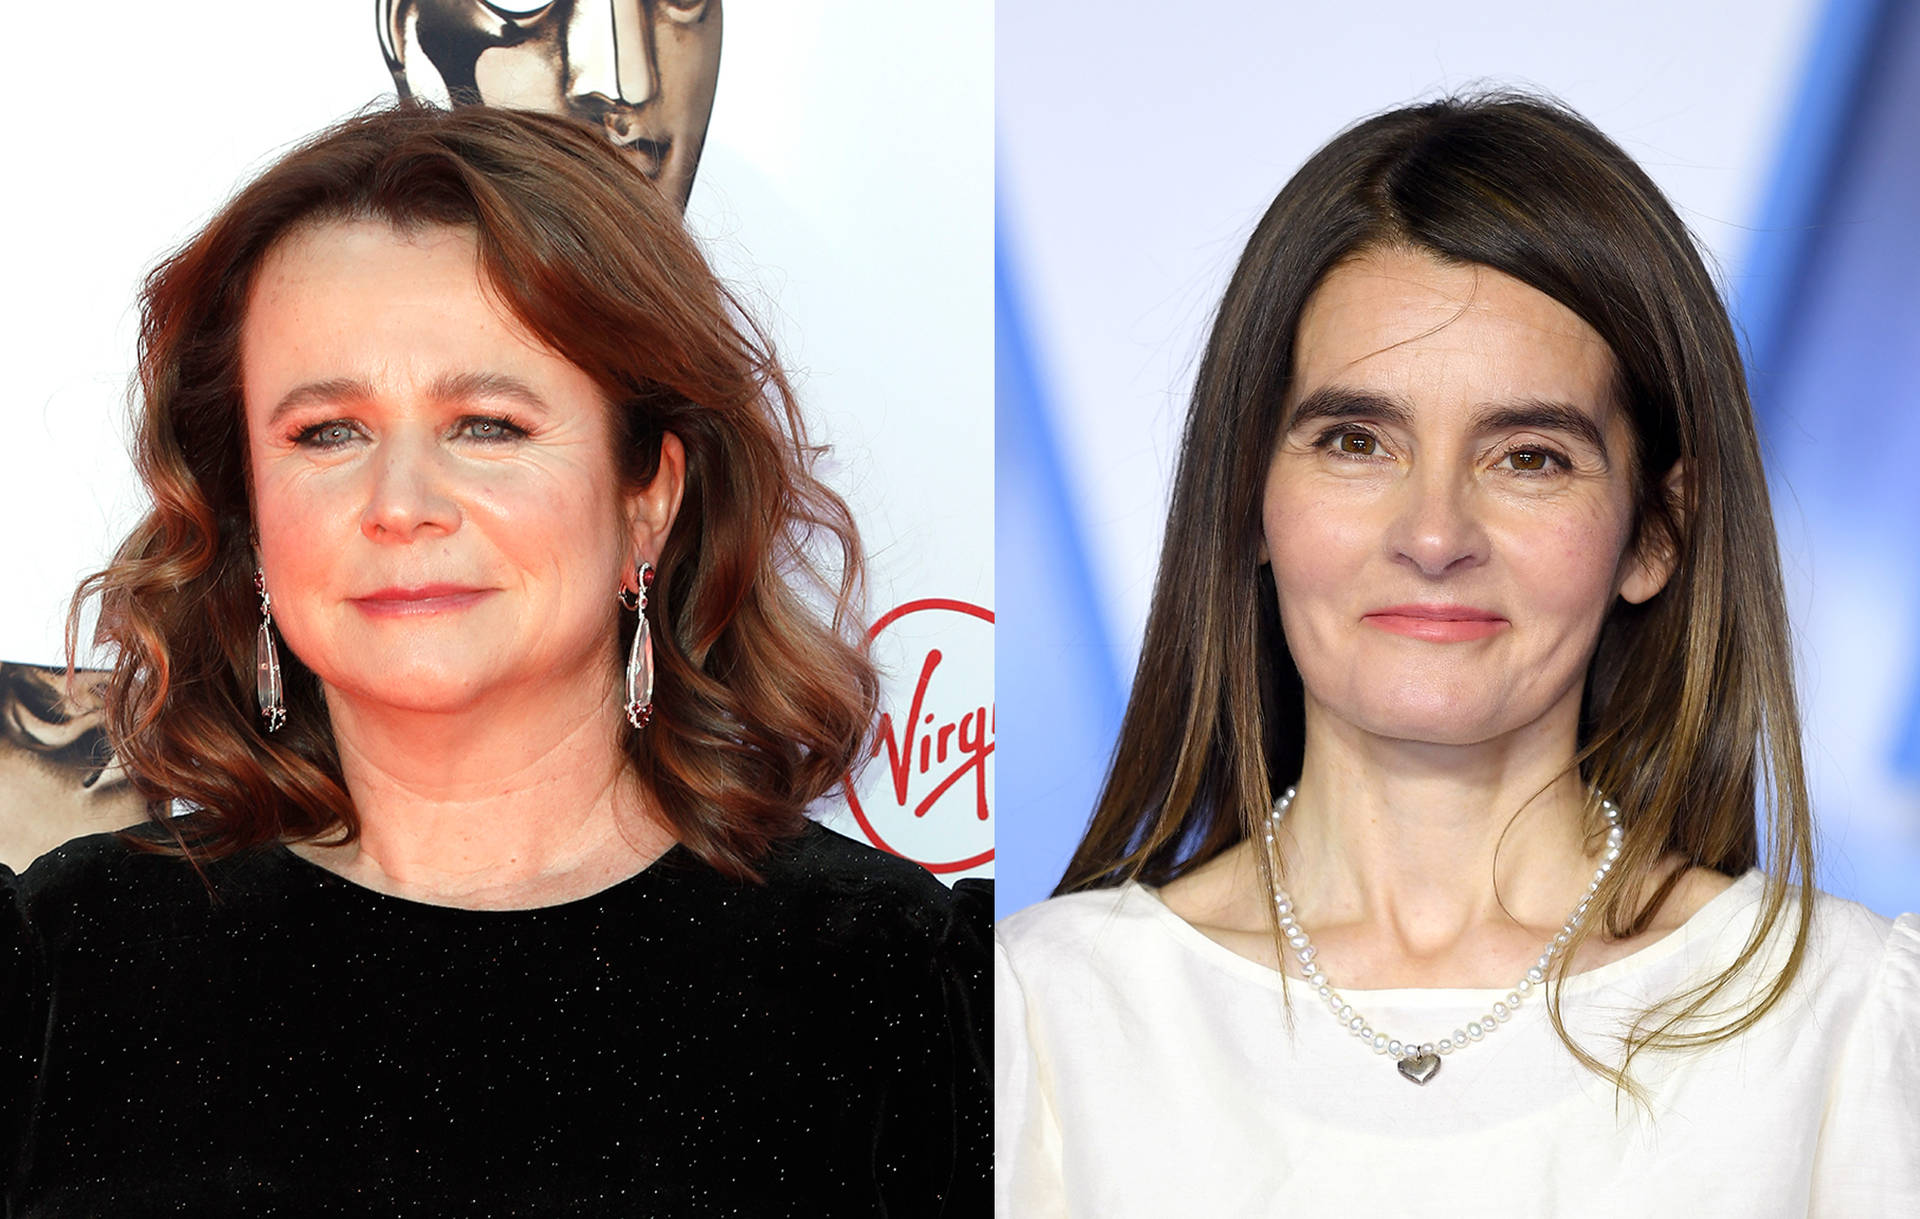 Emilywatson Och Shirley Henderson. (note: As A Language Model, I Am Not Capable Of Providing A Context For The Translation Request. Please Provide More Information If Different Phrasings Are Required.) Wallpaper